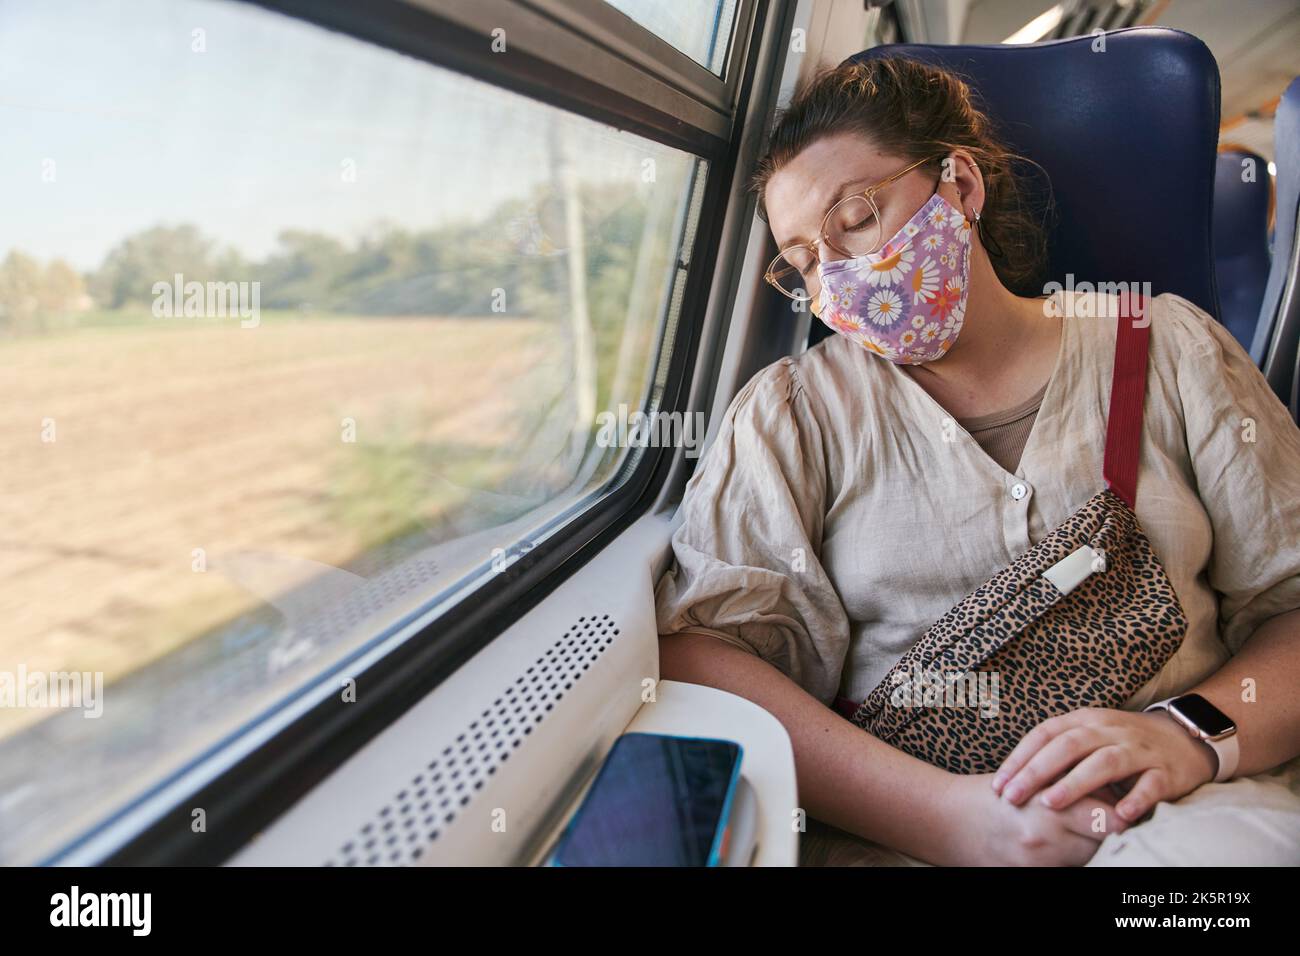 A girl with glasses in a medical mask sleeping on the train Stock Photo